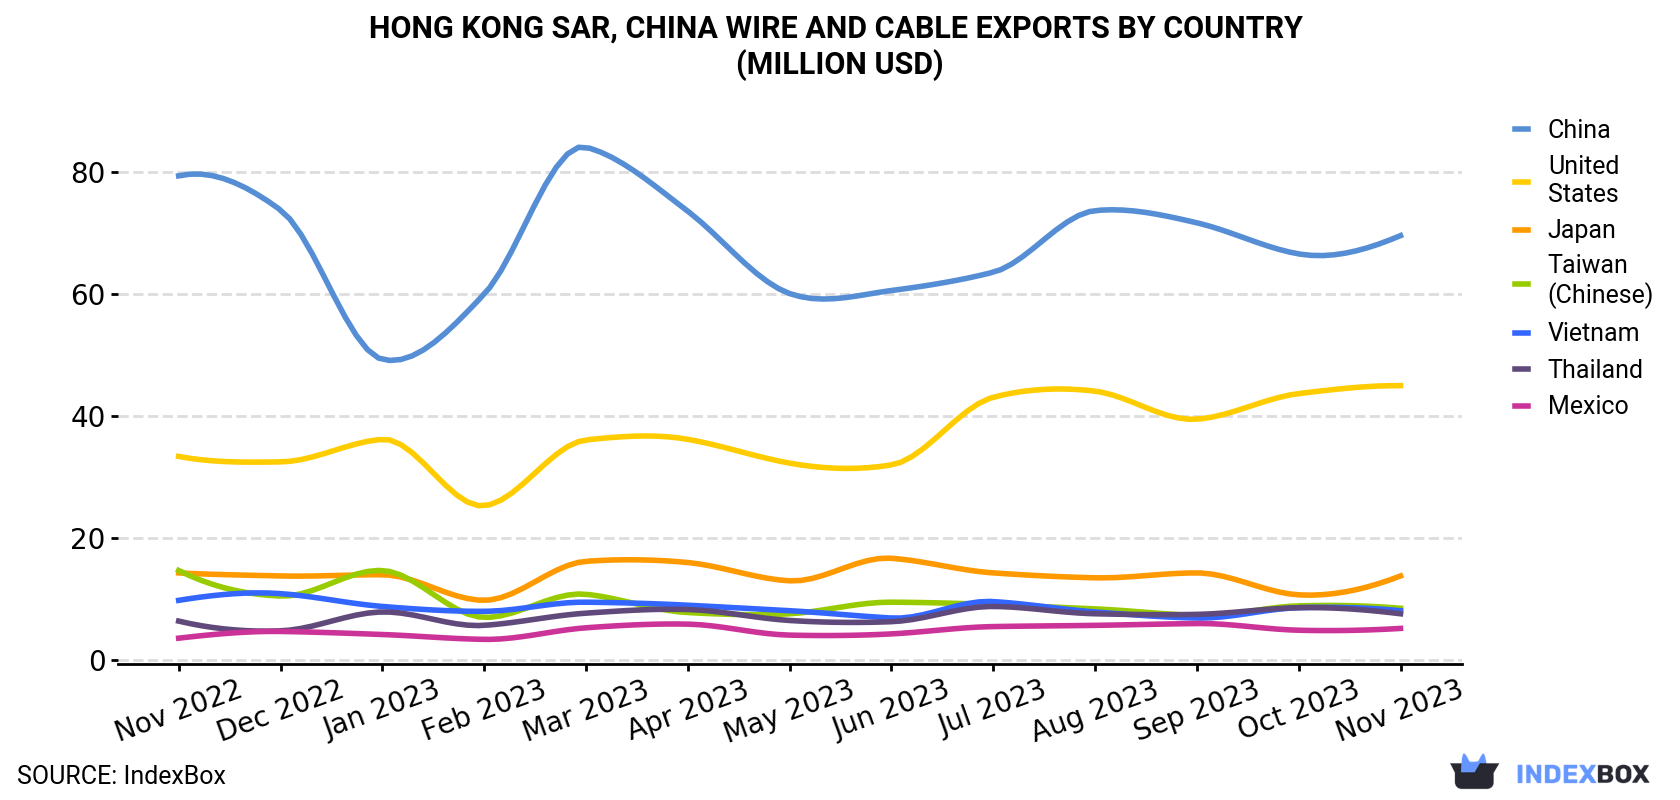 Hong Kong Wire And Cable Exports By Country (Million USD)